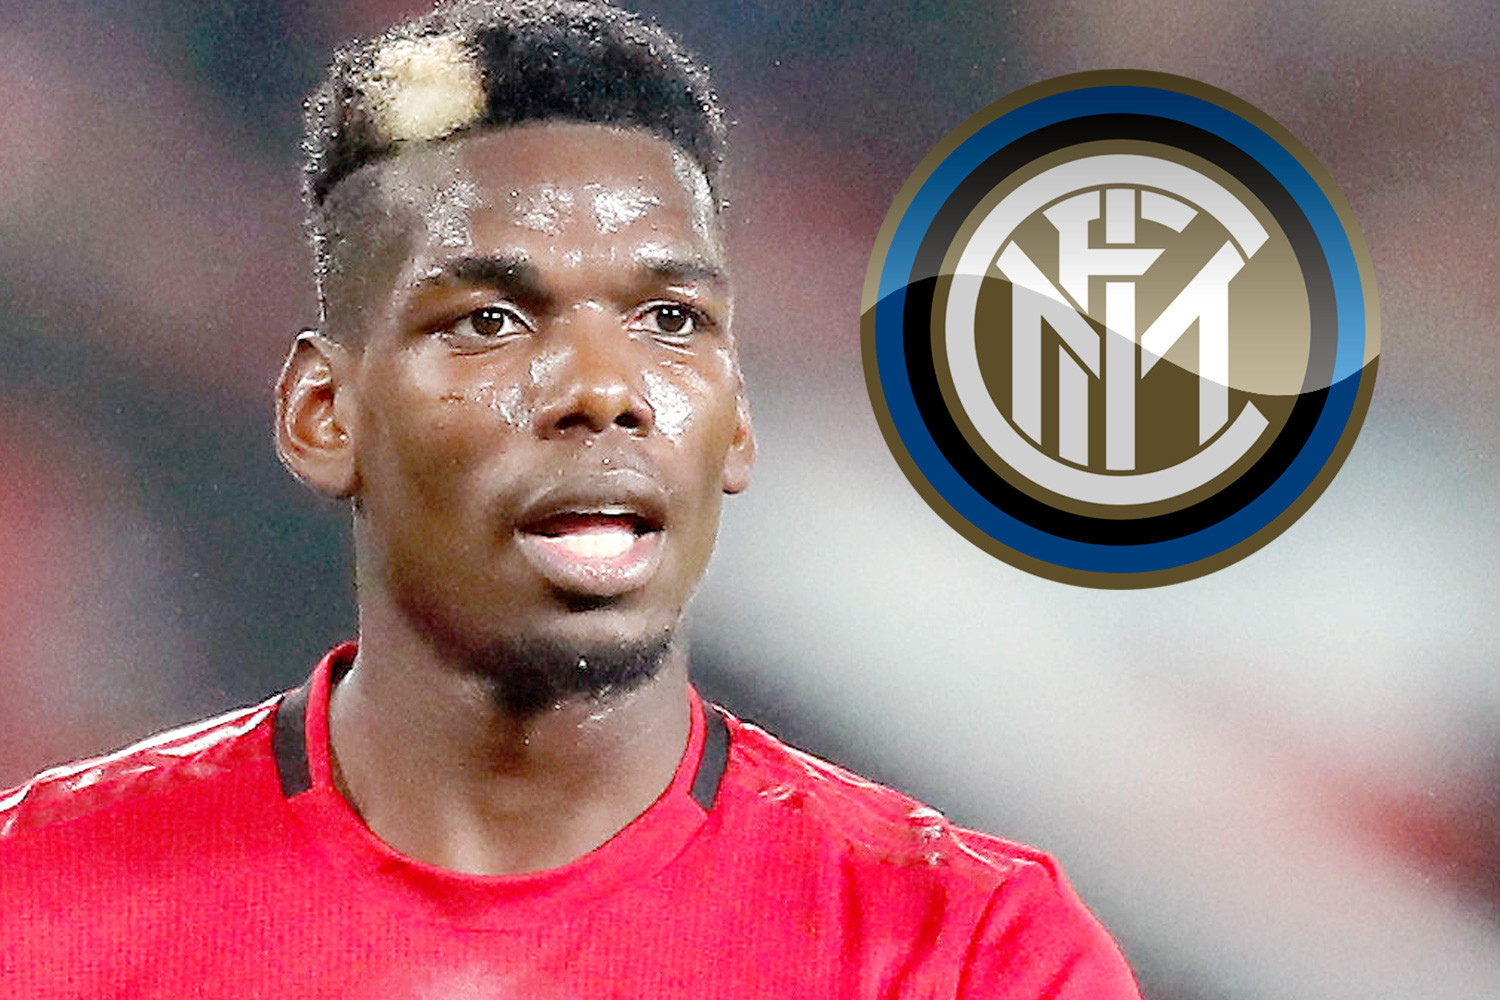 , Inter Milan spark four-way Paul Pogba transfer war but Man Utd ‘relaxed’ over star with option to extend his contract